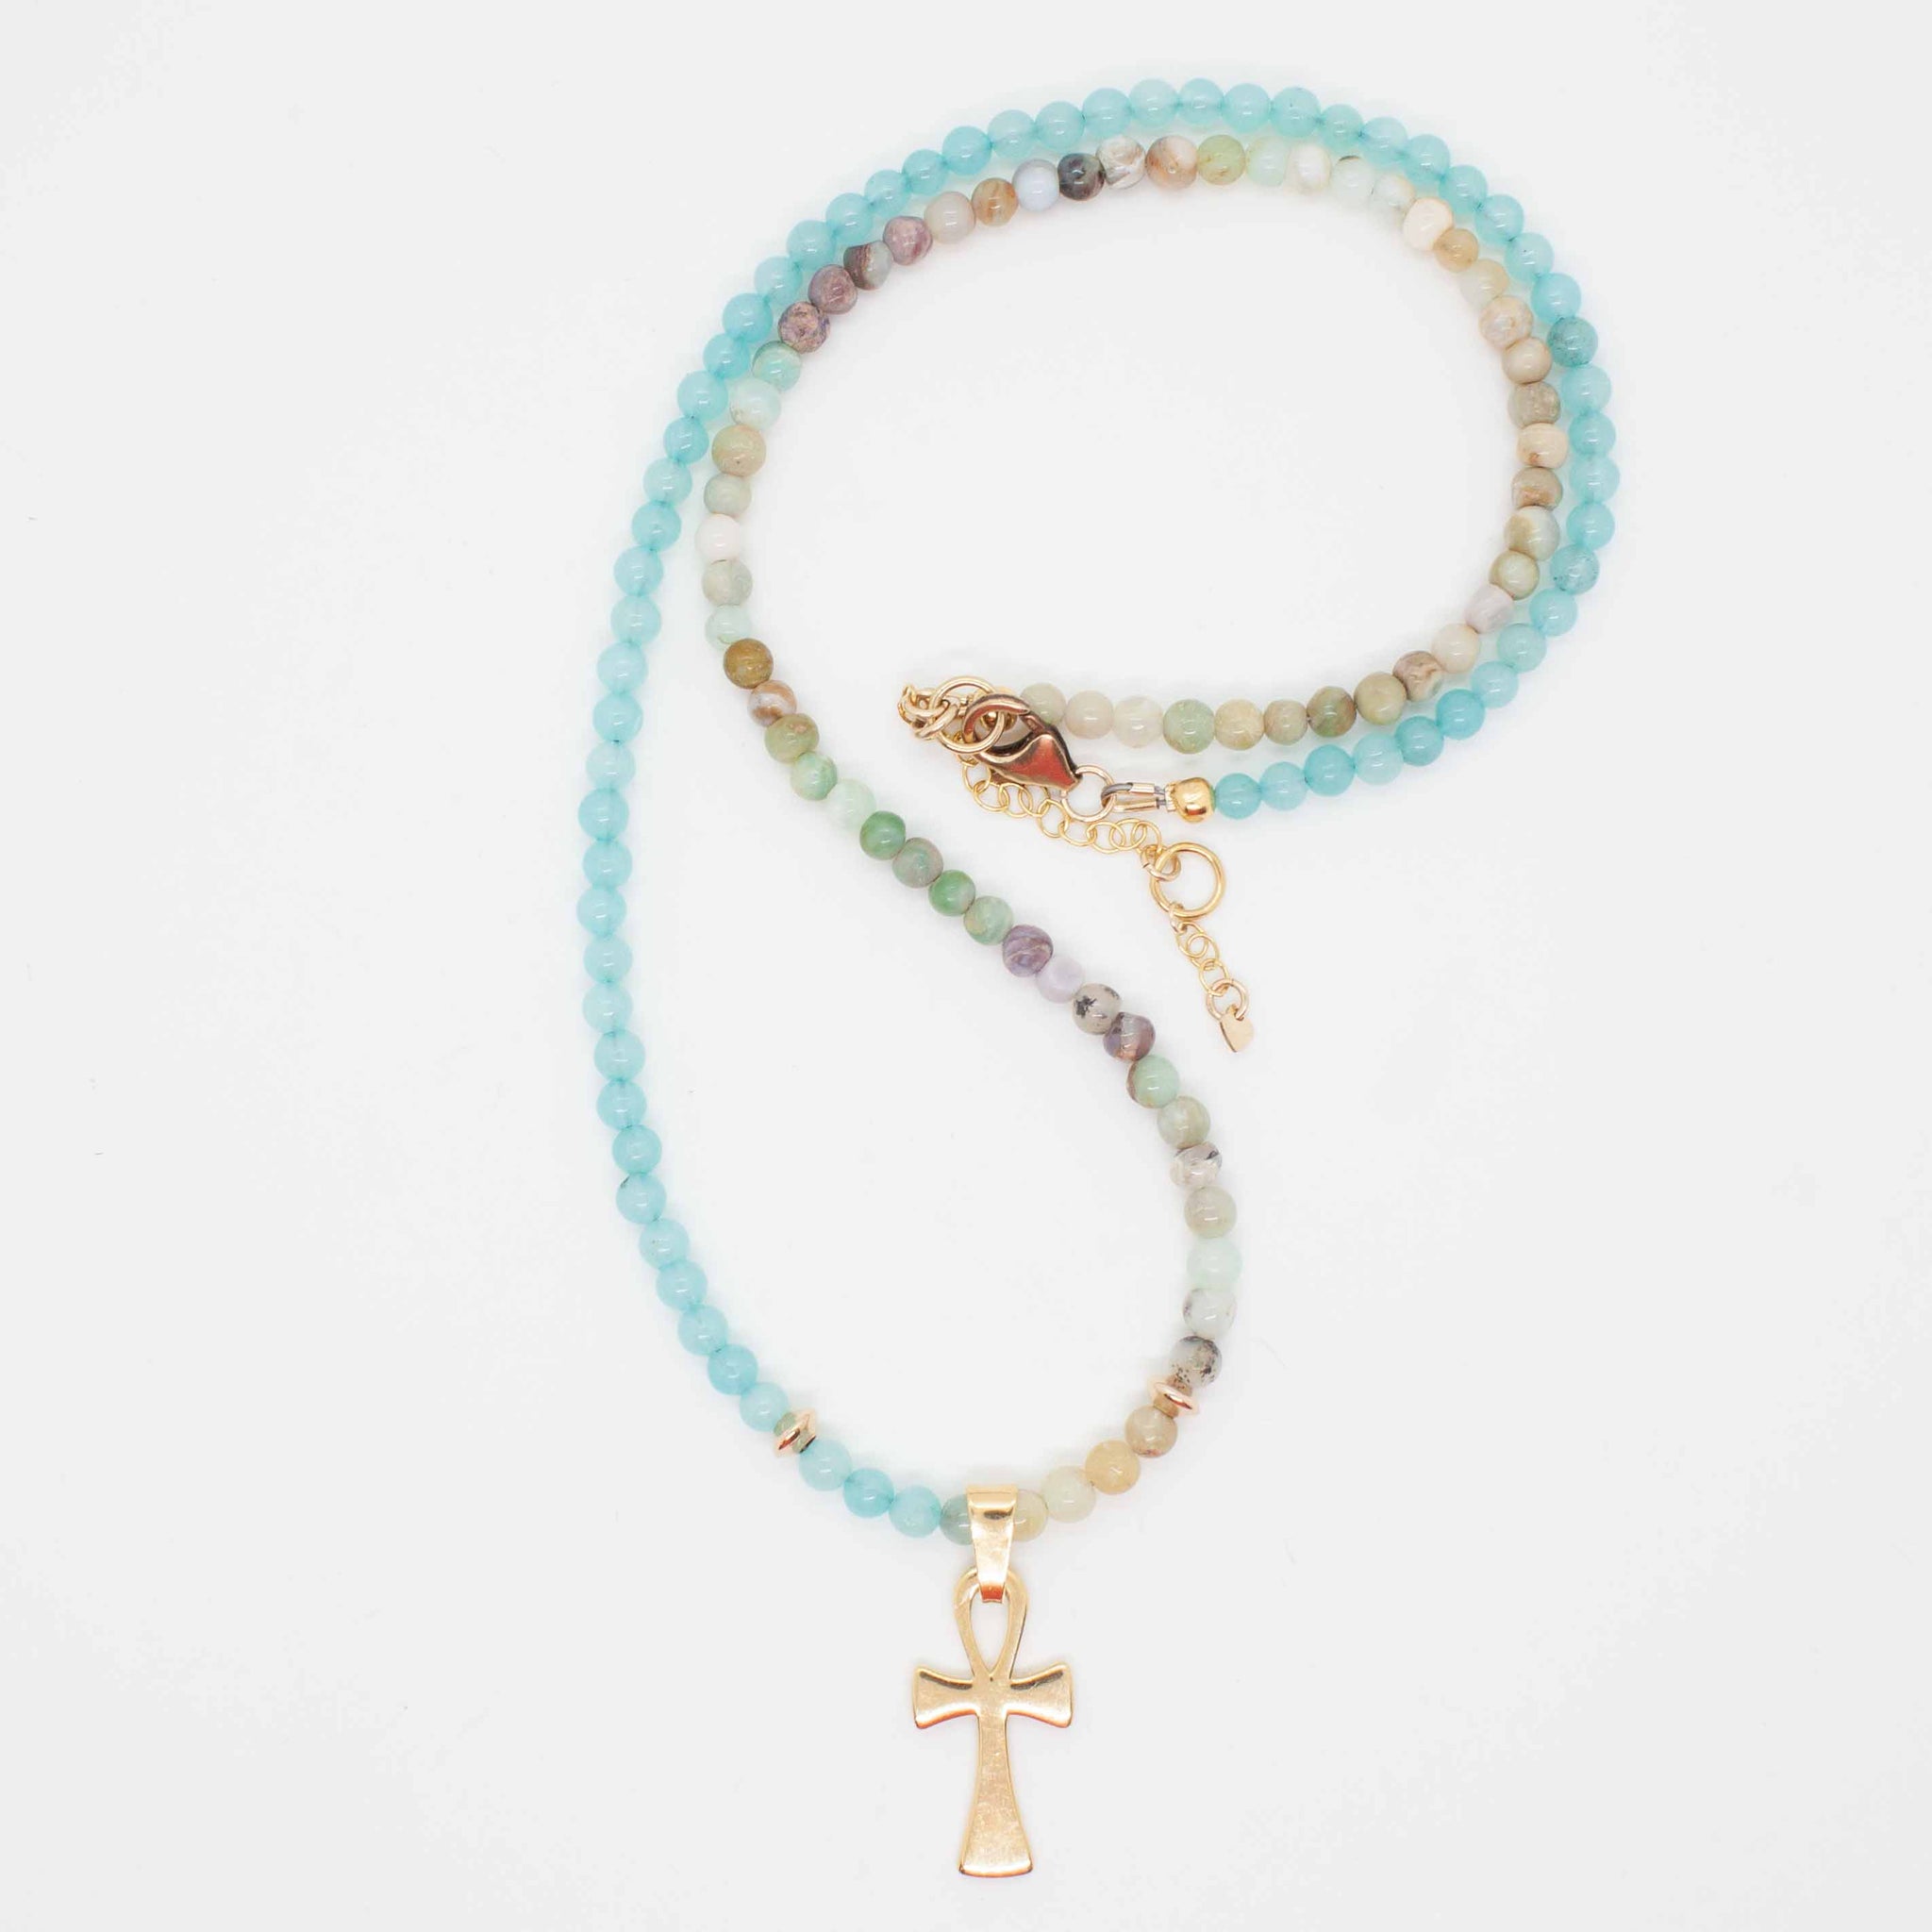 Jade and peruvian opal beaded necklace with gold ankh pendant.